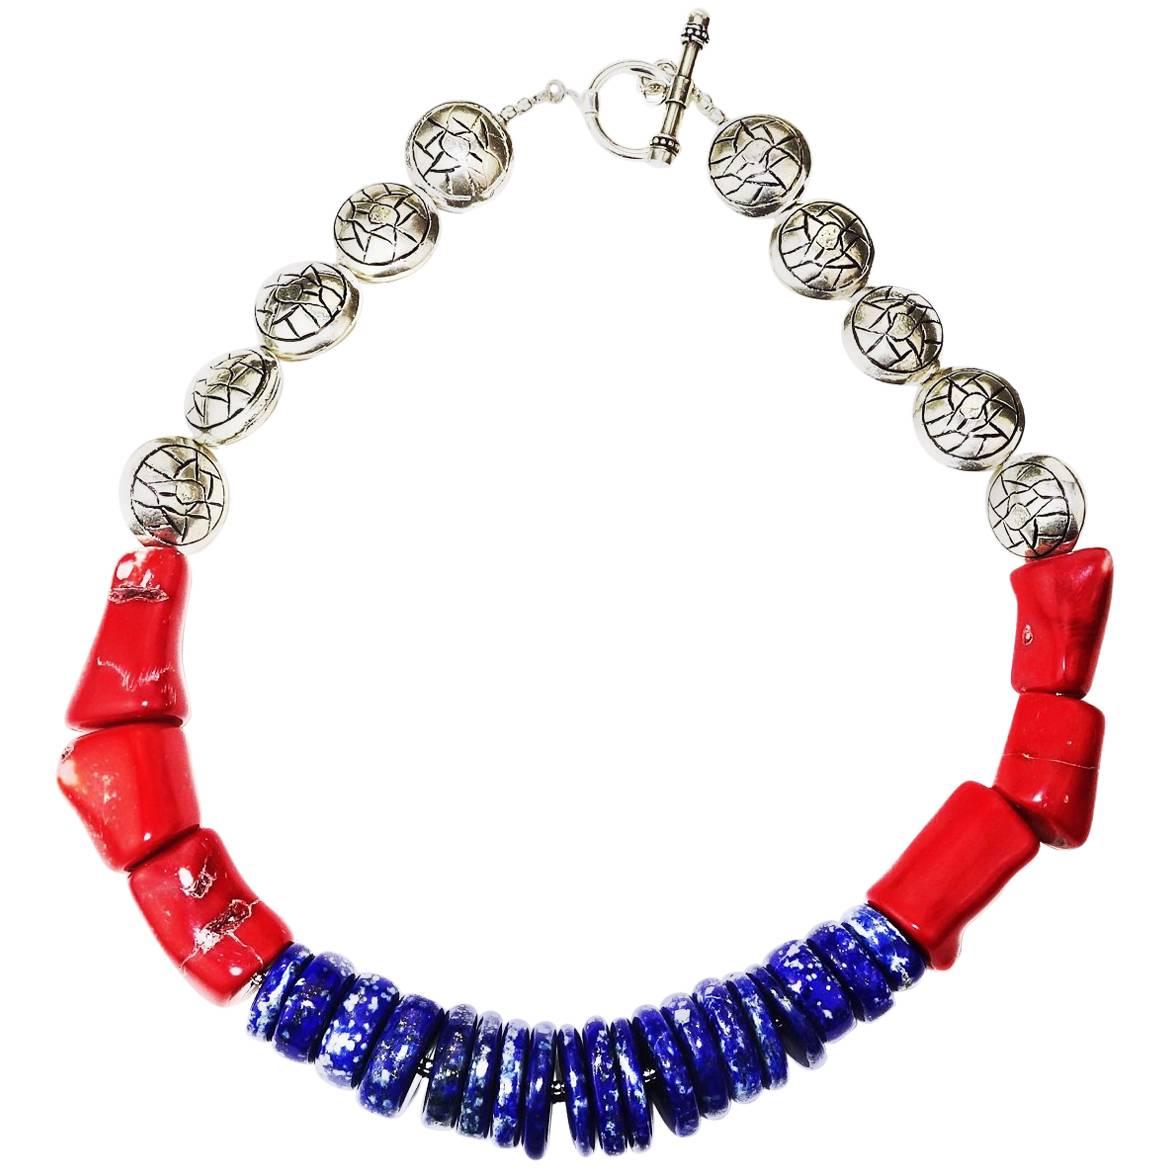 Artisan AJD Stunning Lapis Lazuli, Coral and Silver Necklace